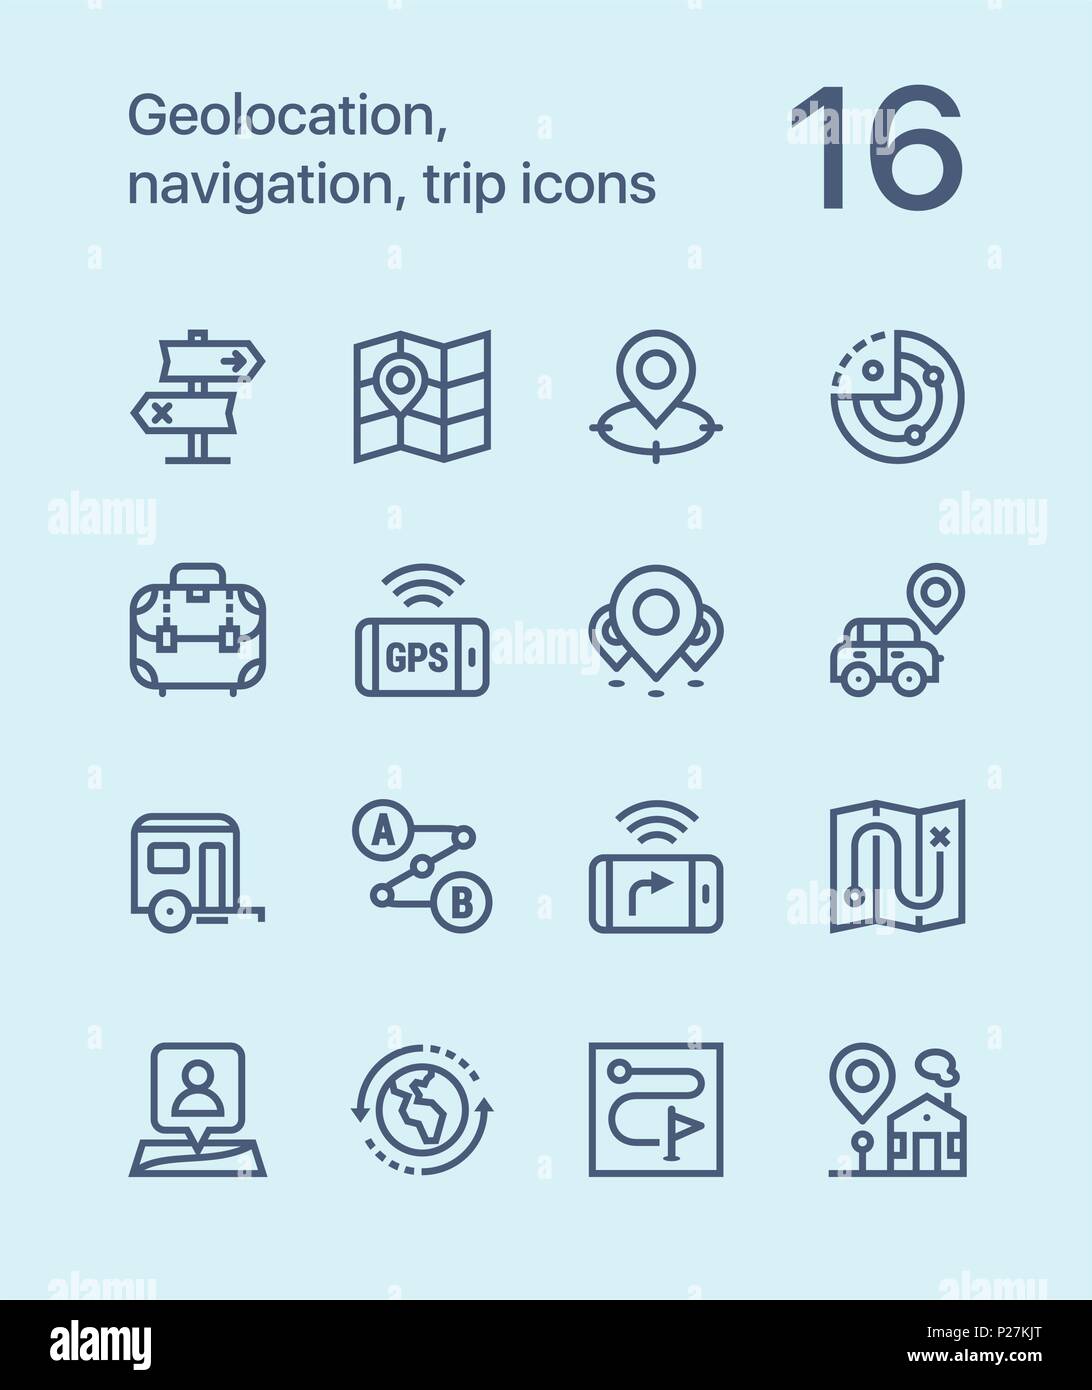 Outline Geolocation, navigation, trip icons for web and mobile design pack 2 Stock Vector